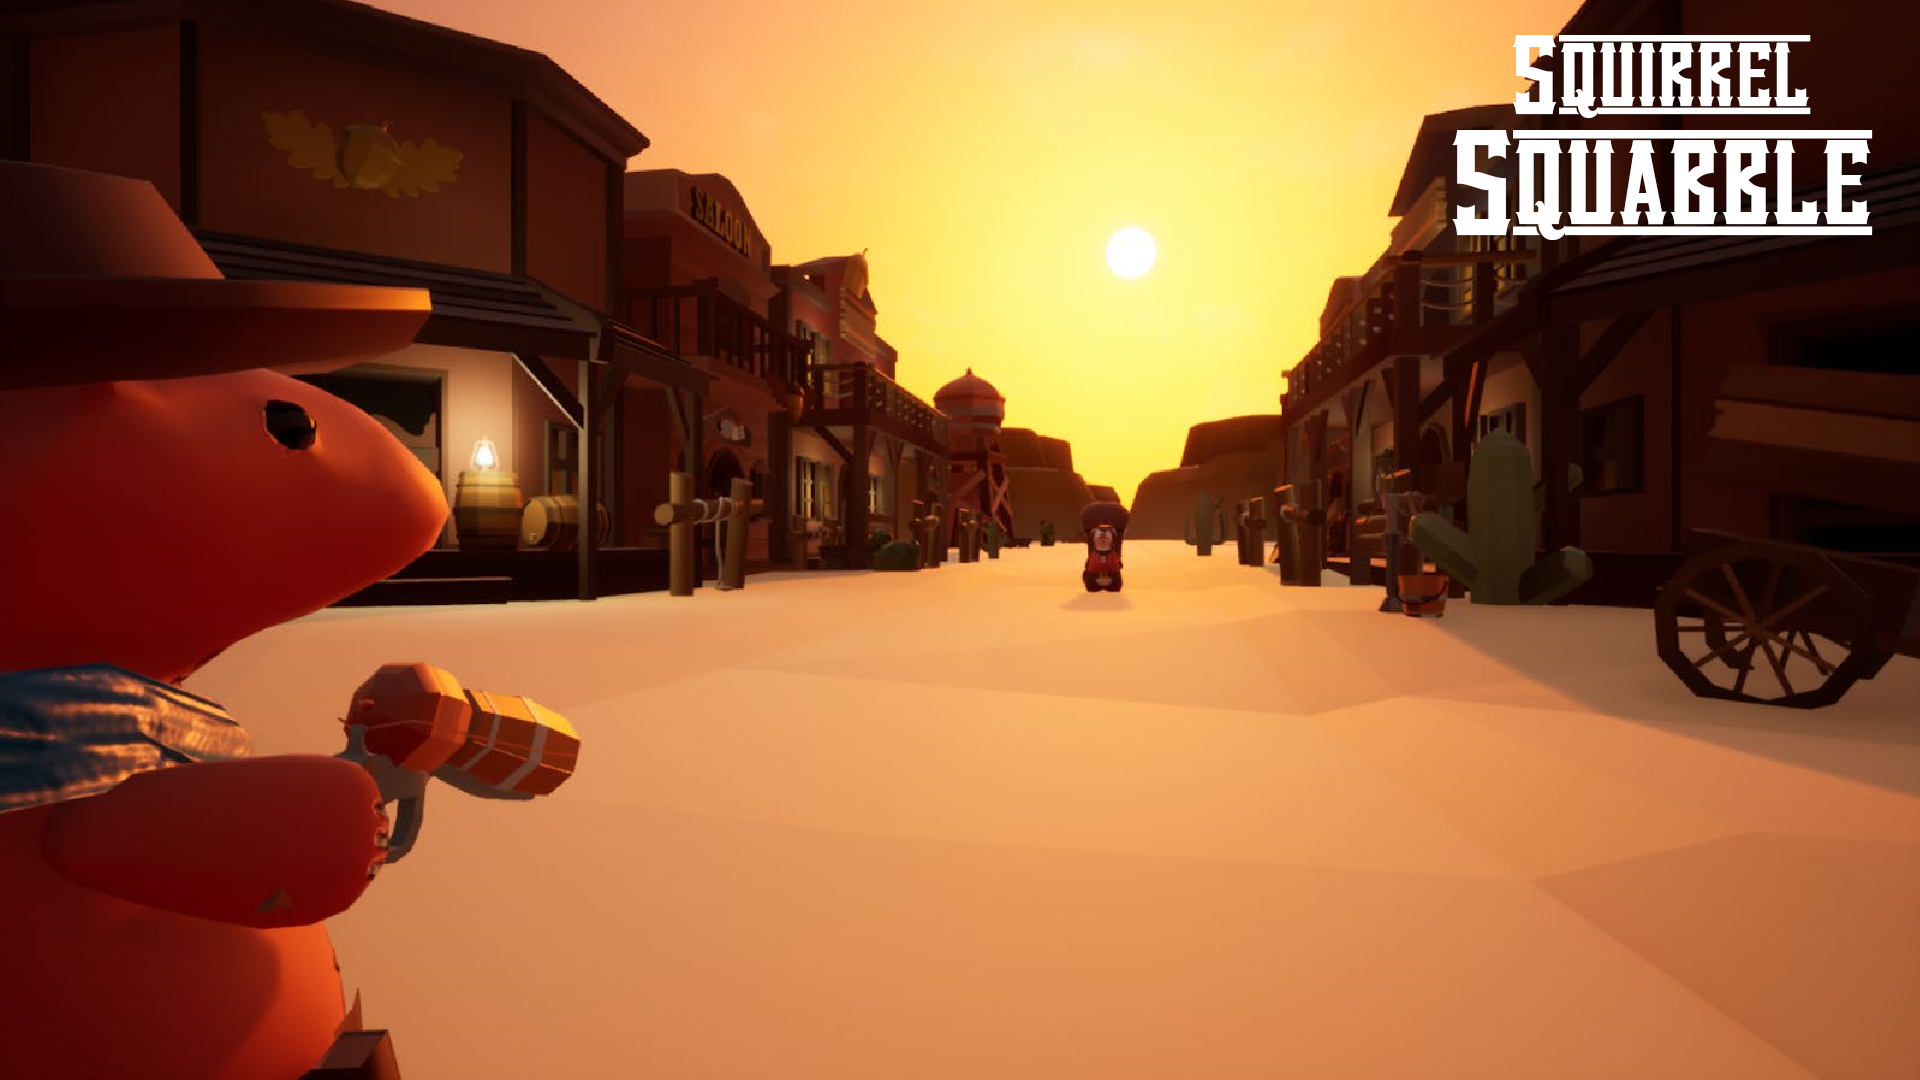 A screenshot of a university game jam co-developed by Karmański, featuring a western-inspired environment with two squirrel characters facing each other in a standoff.